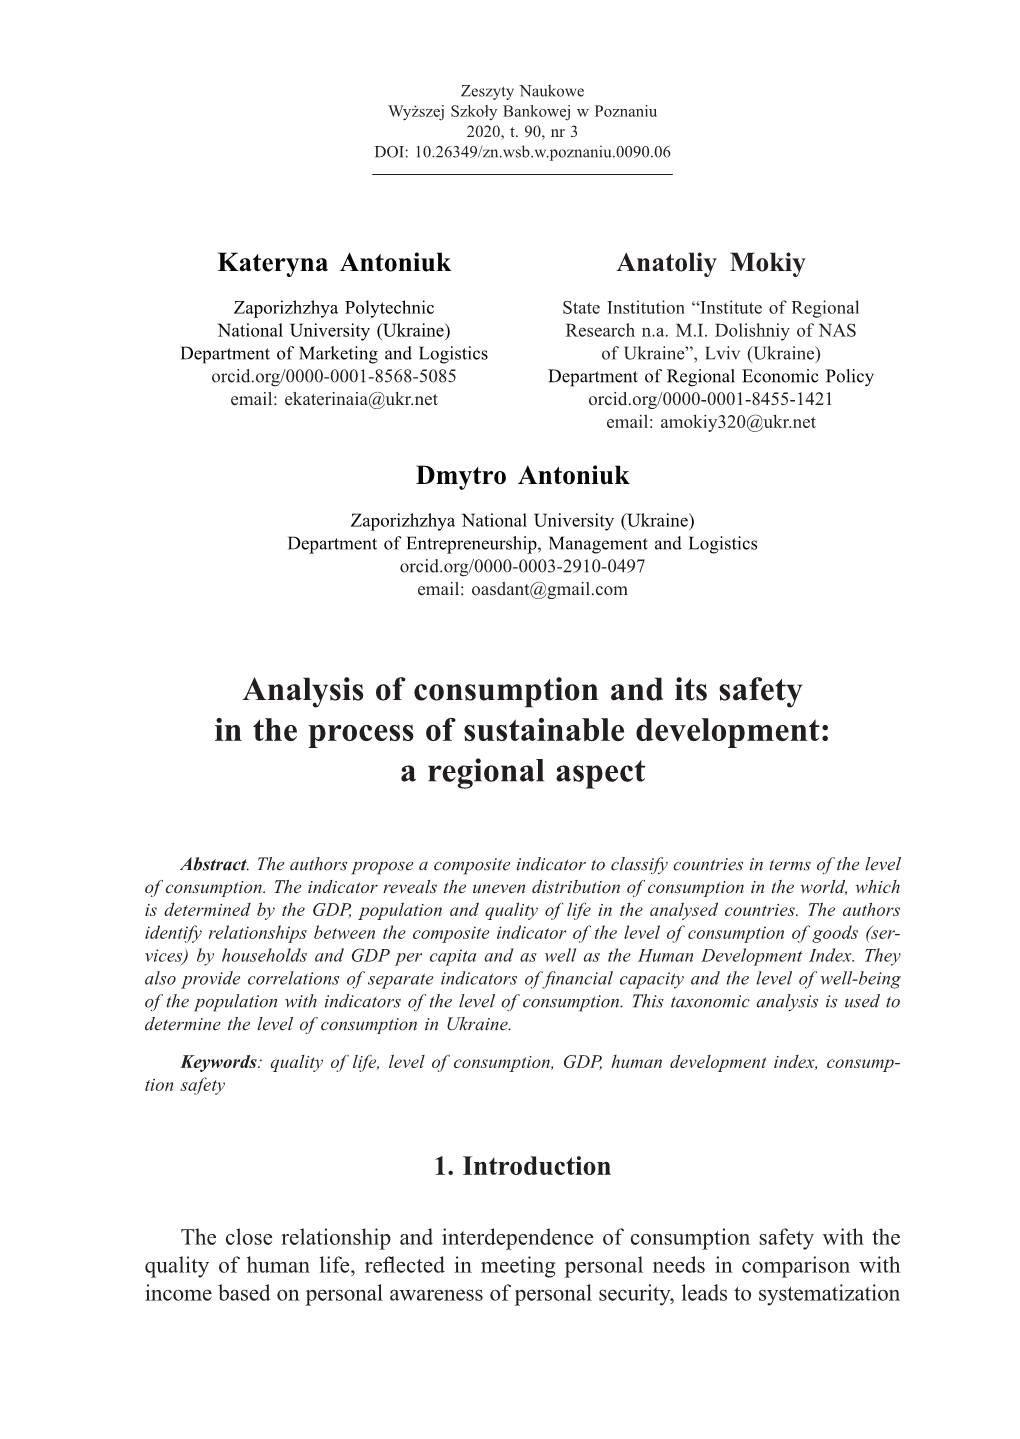 Analysis of Consumption and Its Safety in the Process of Sustainable Development: a Regional Aspect